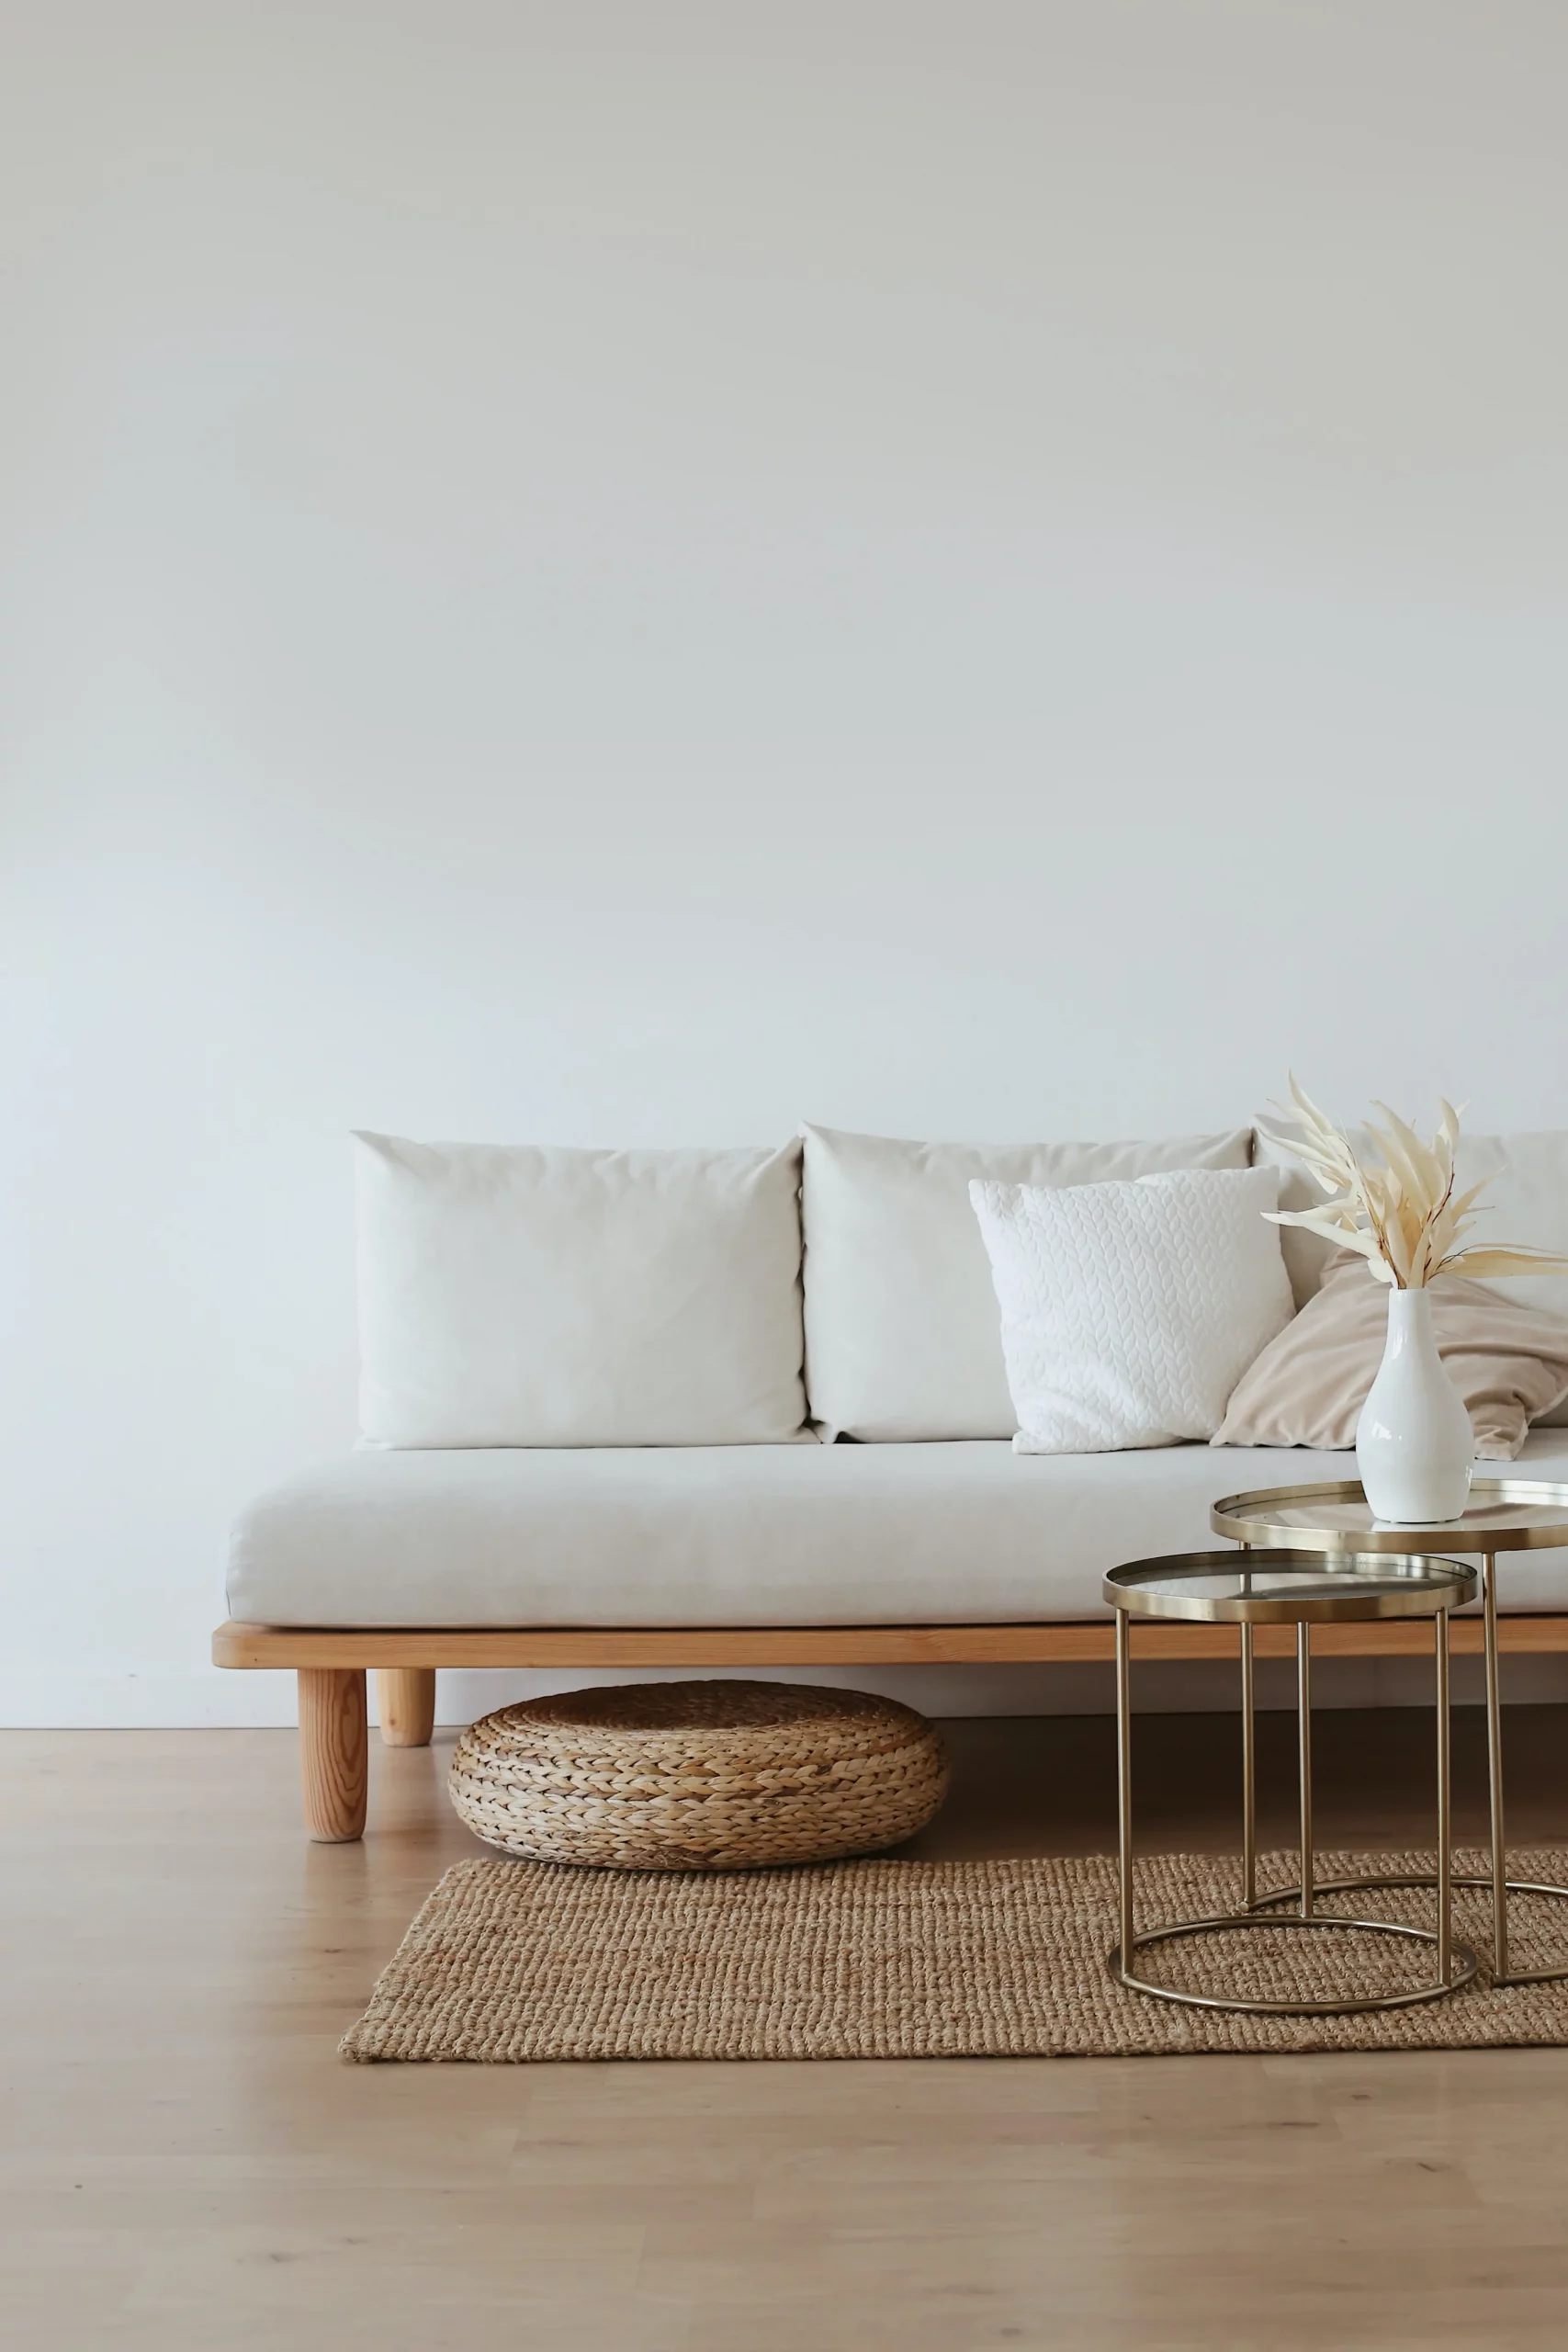 6 Tips for Creating Minimal yet Functional Interior Designs in India